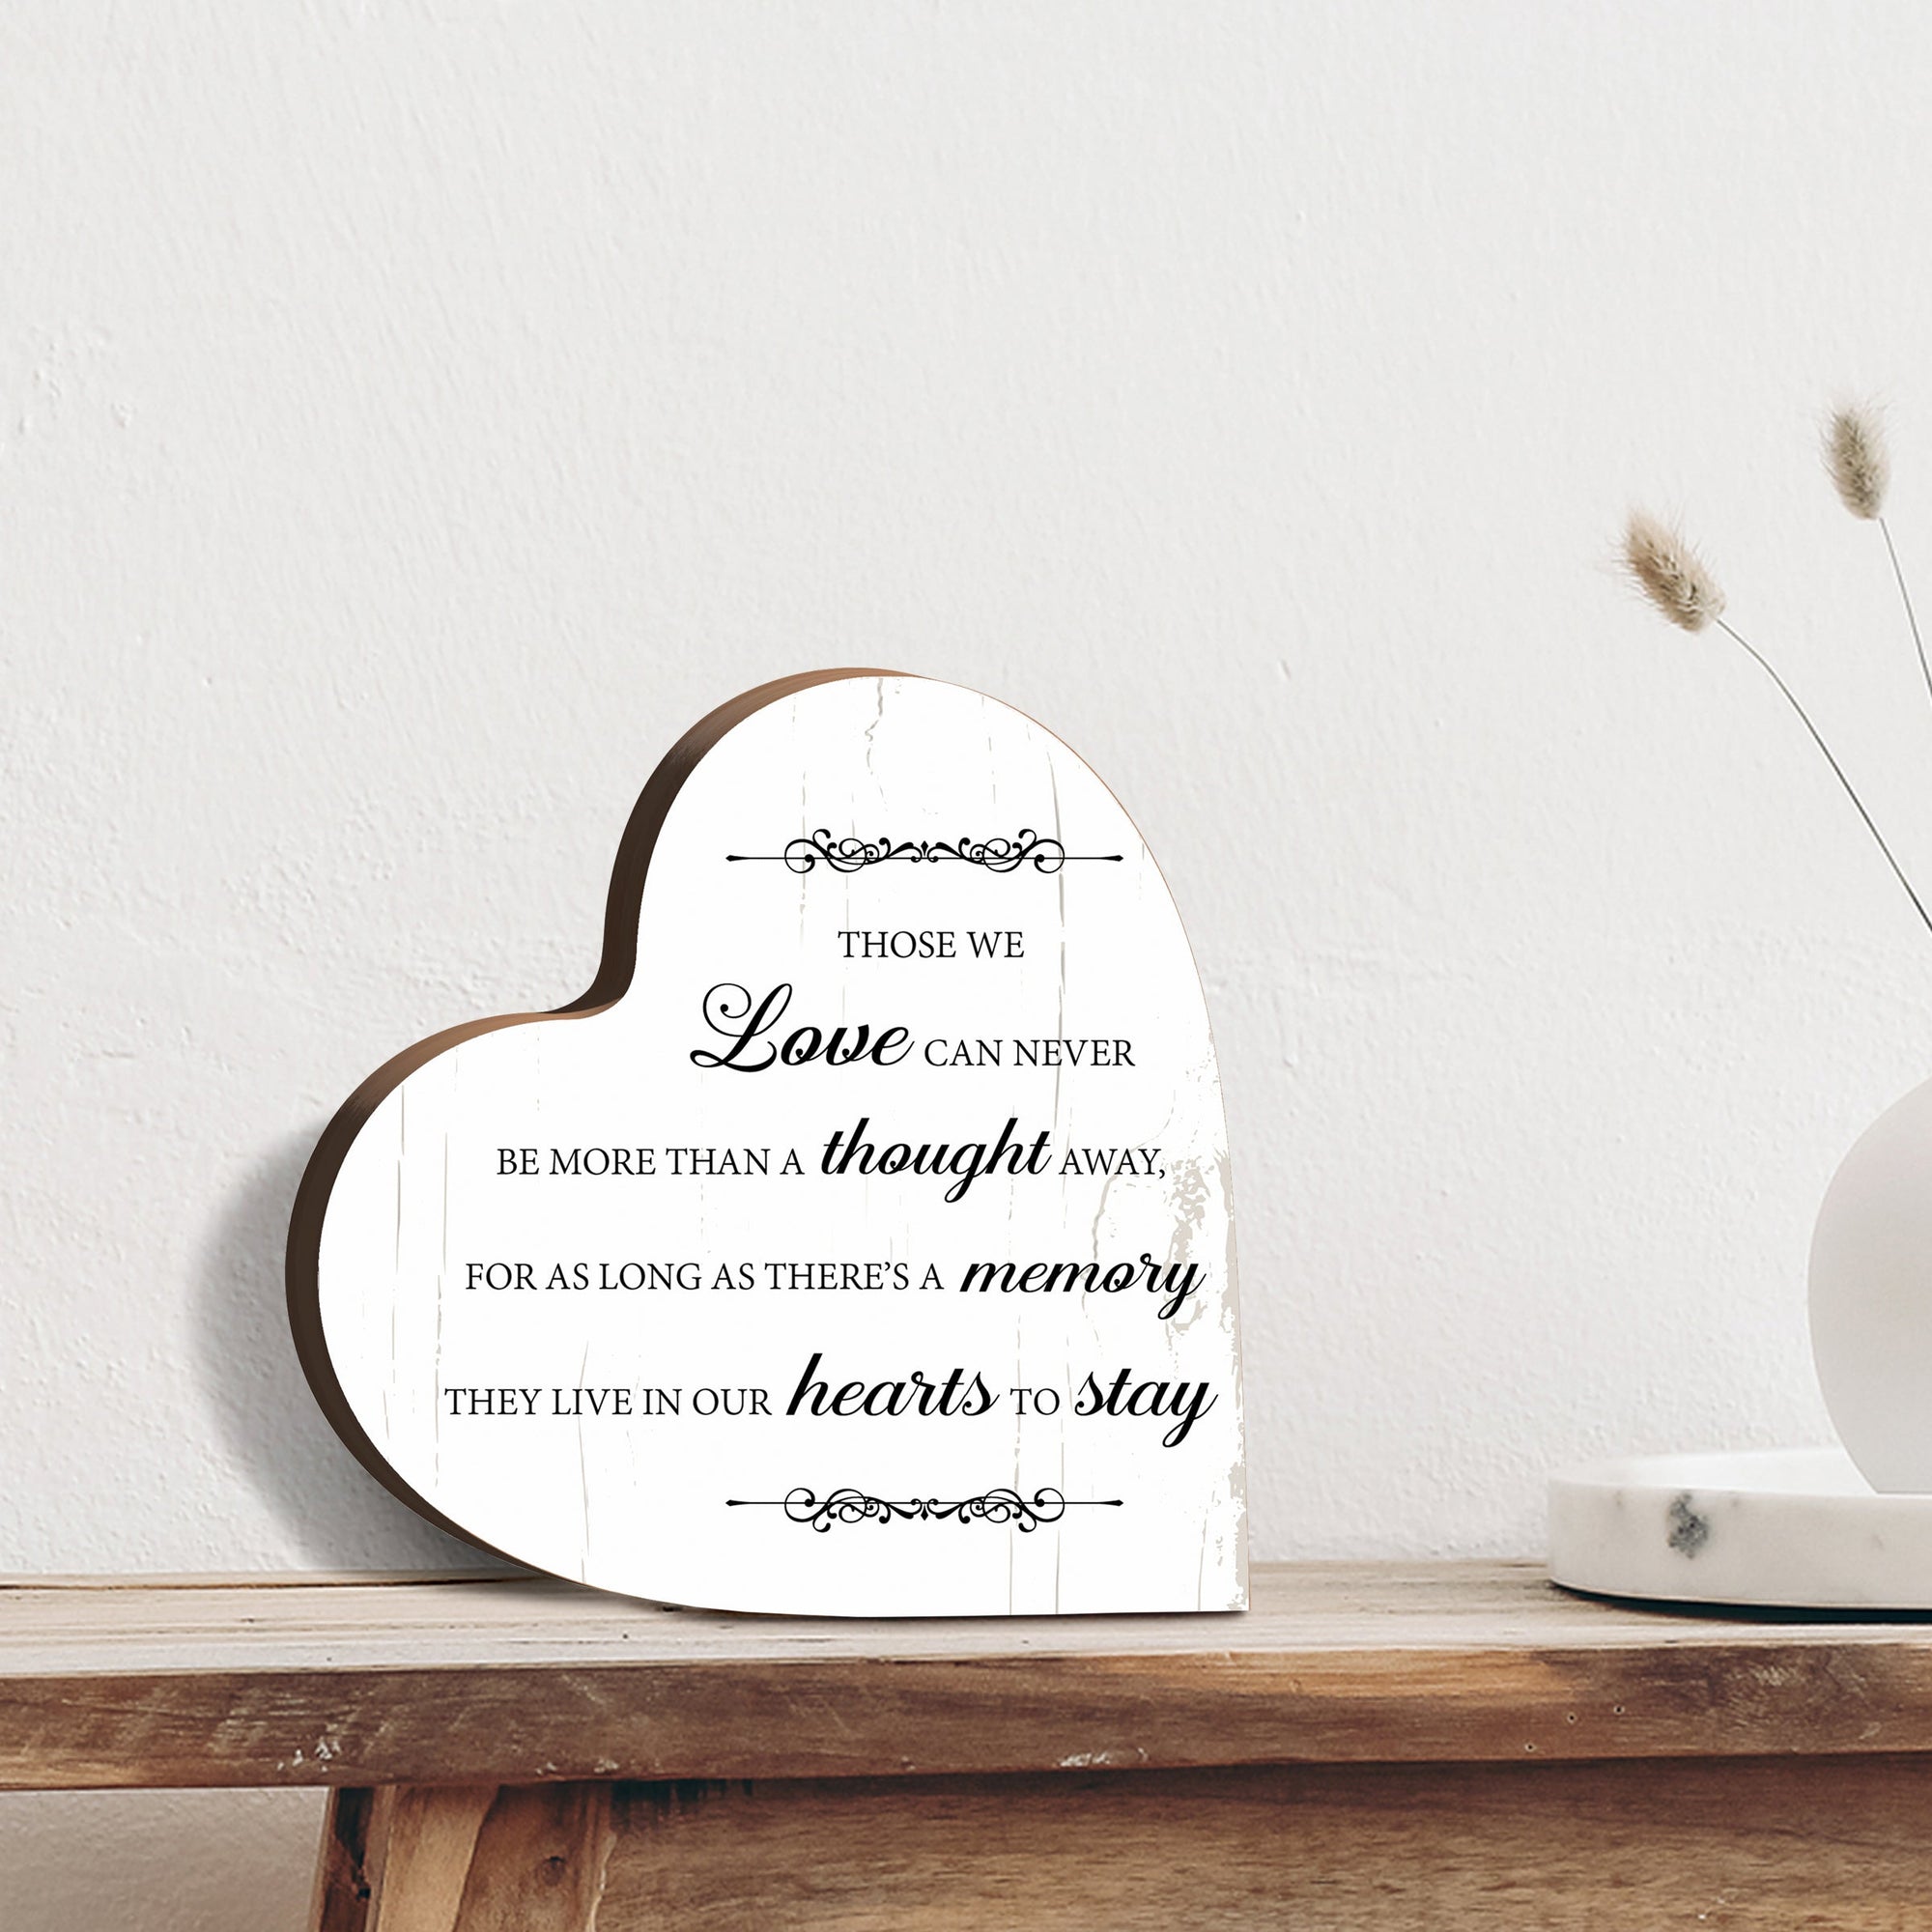 Wooden memorial heart block sign, a thoughtful choice for memorial gifts.